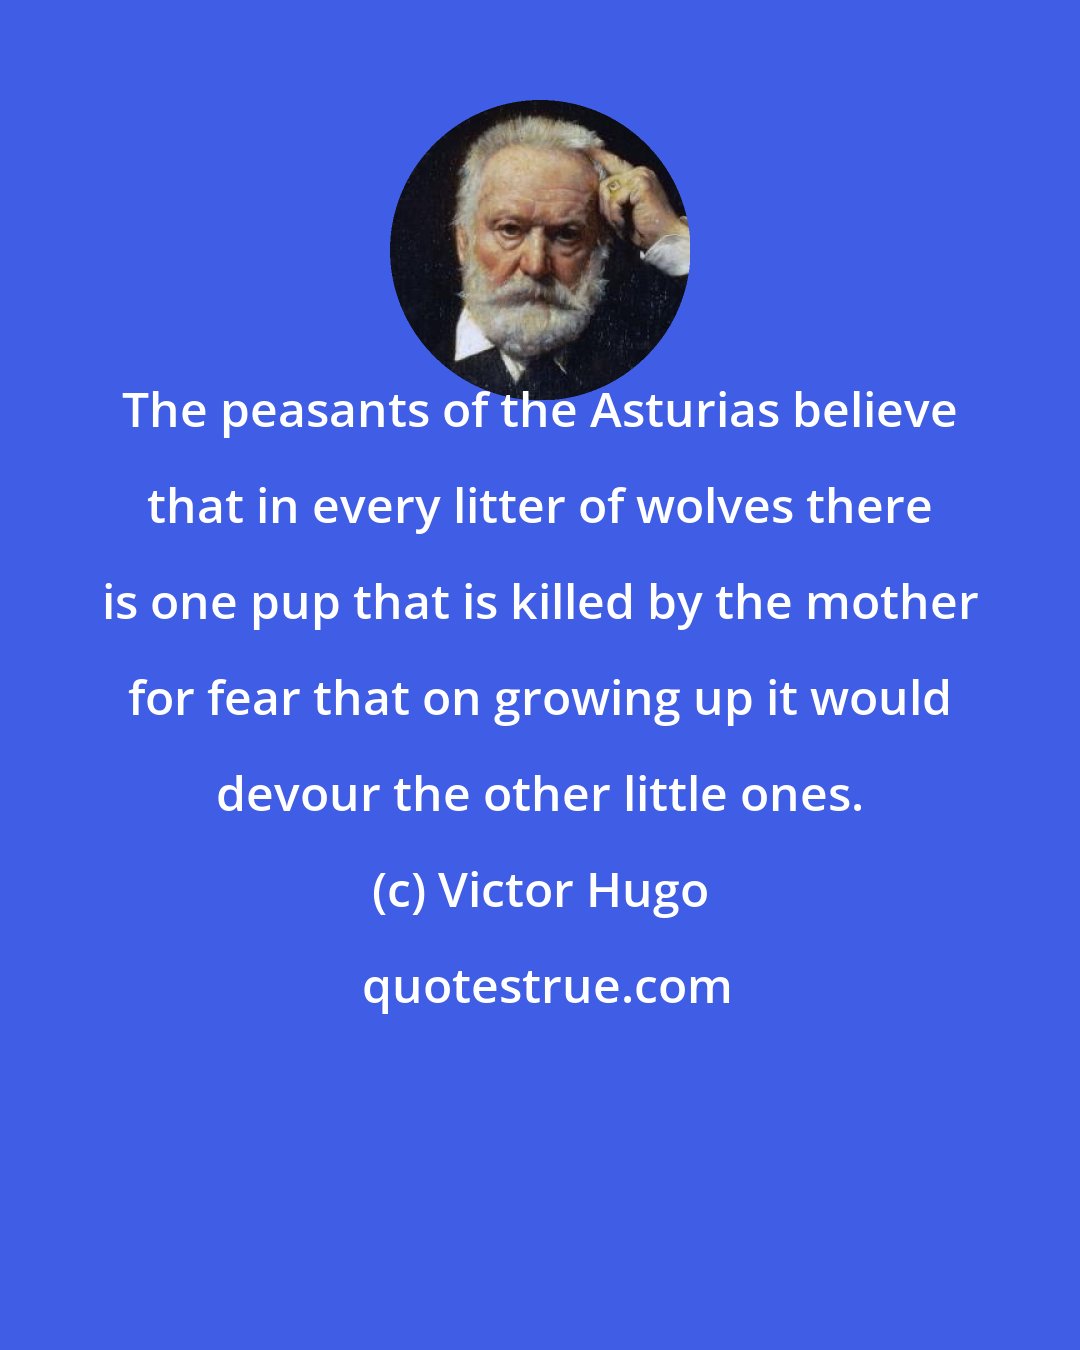 Victor Hugo: The peasants of the Asturias believe that in every litter of wolves there is one pup that is killed by the mother for fear that on growing up it would devour the other little ones.